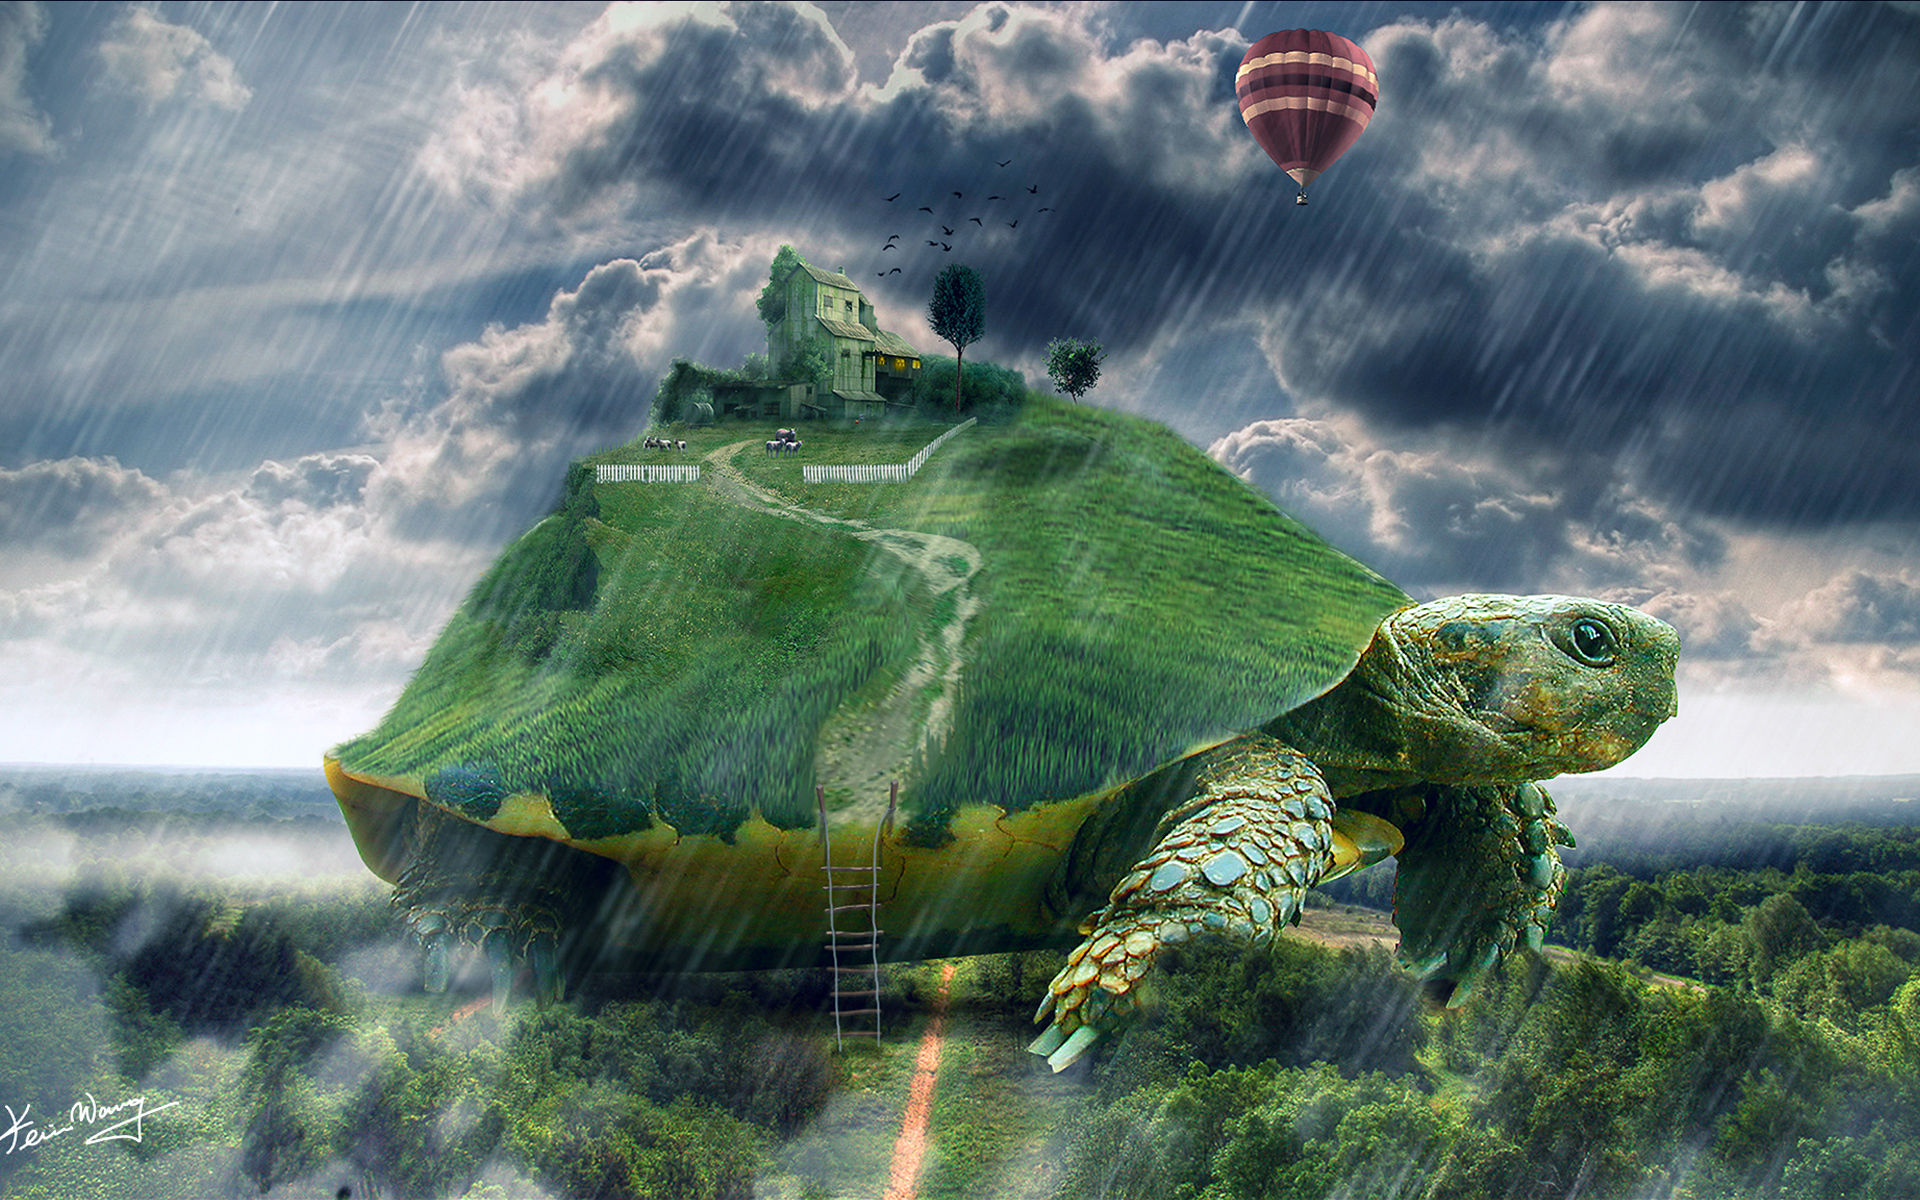 Download PC Wallpaper turtle, psychedelic, artistic, animal, cgi, manipulation, trippy